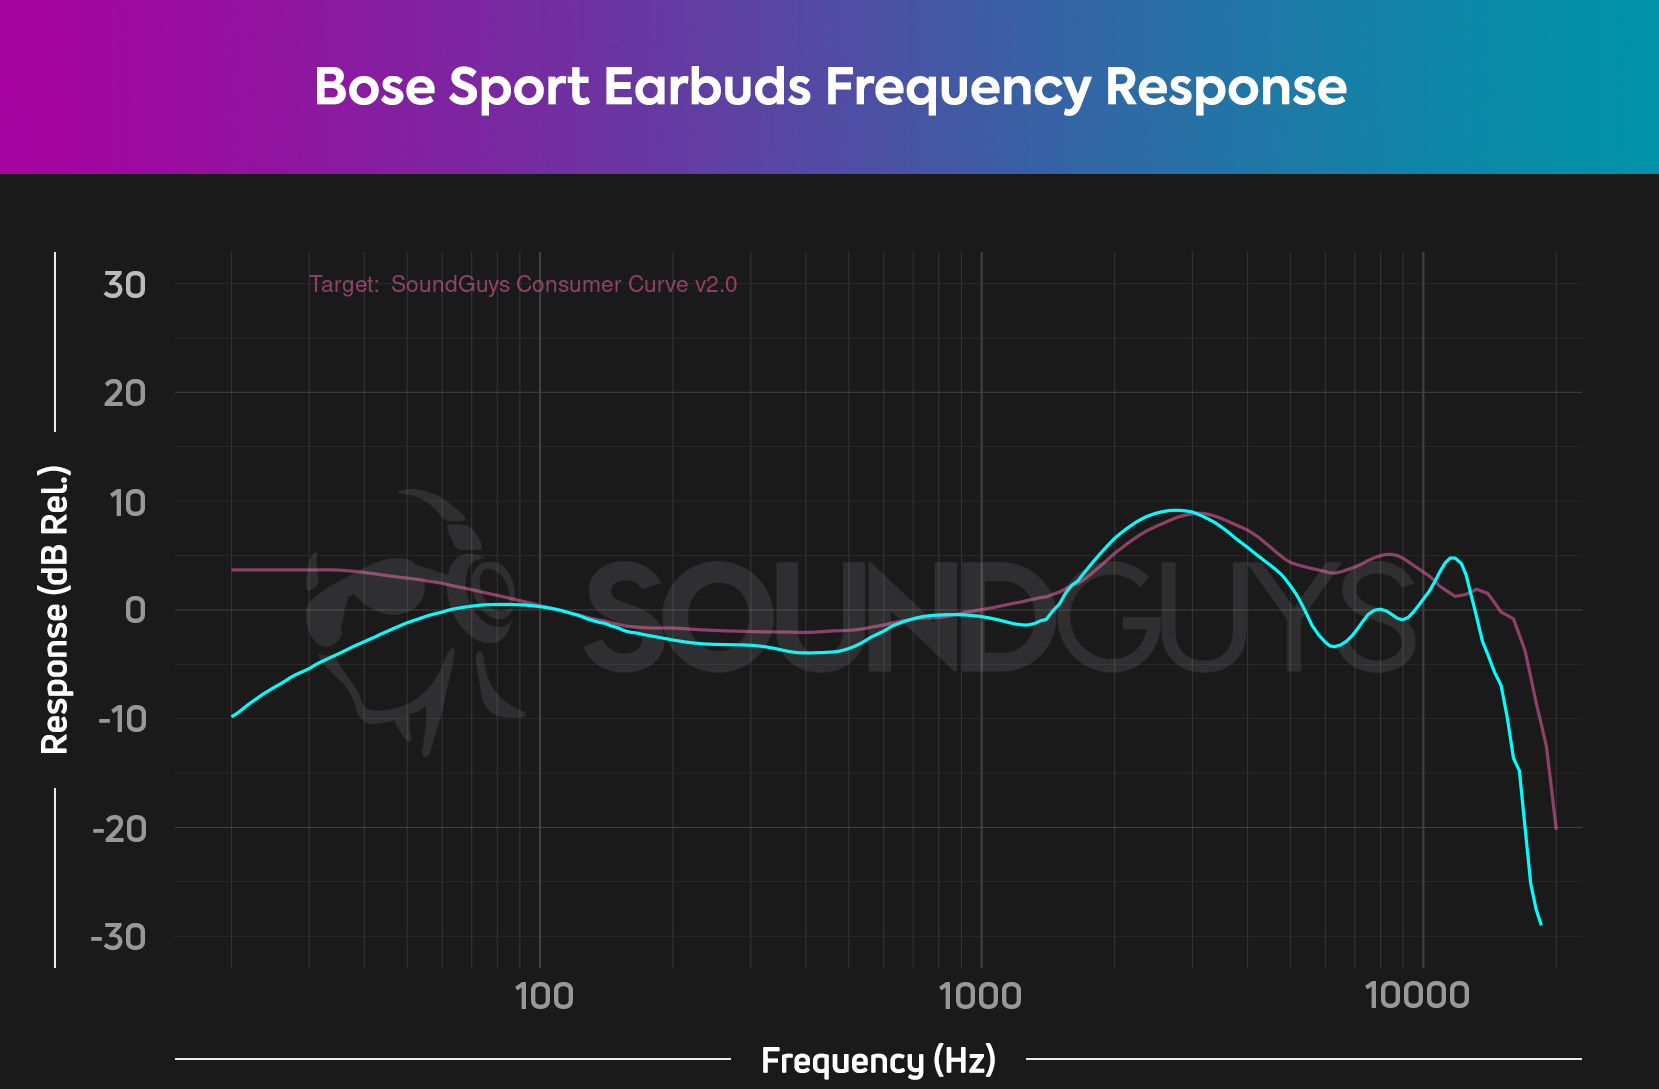 Chart shows the Bose Sport Earbuds frequency response compared to the SoundGuys ideal frequency response.